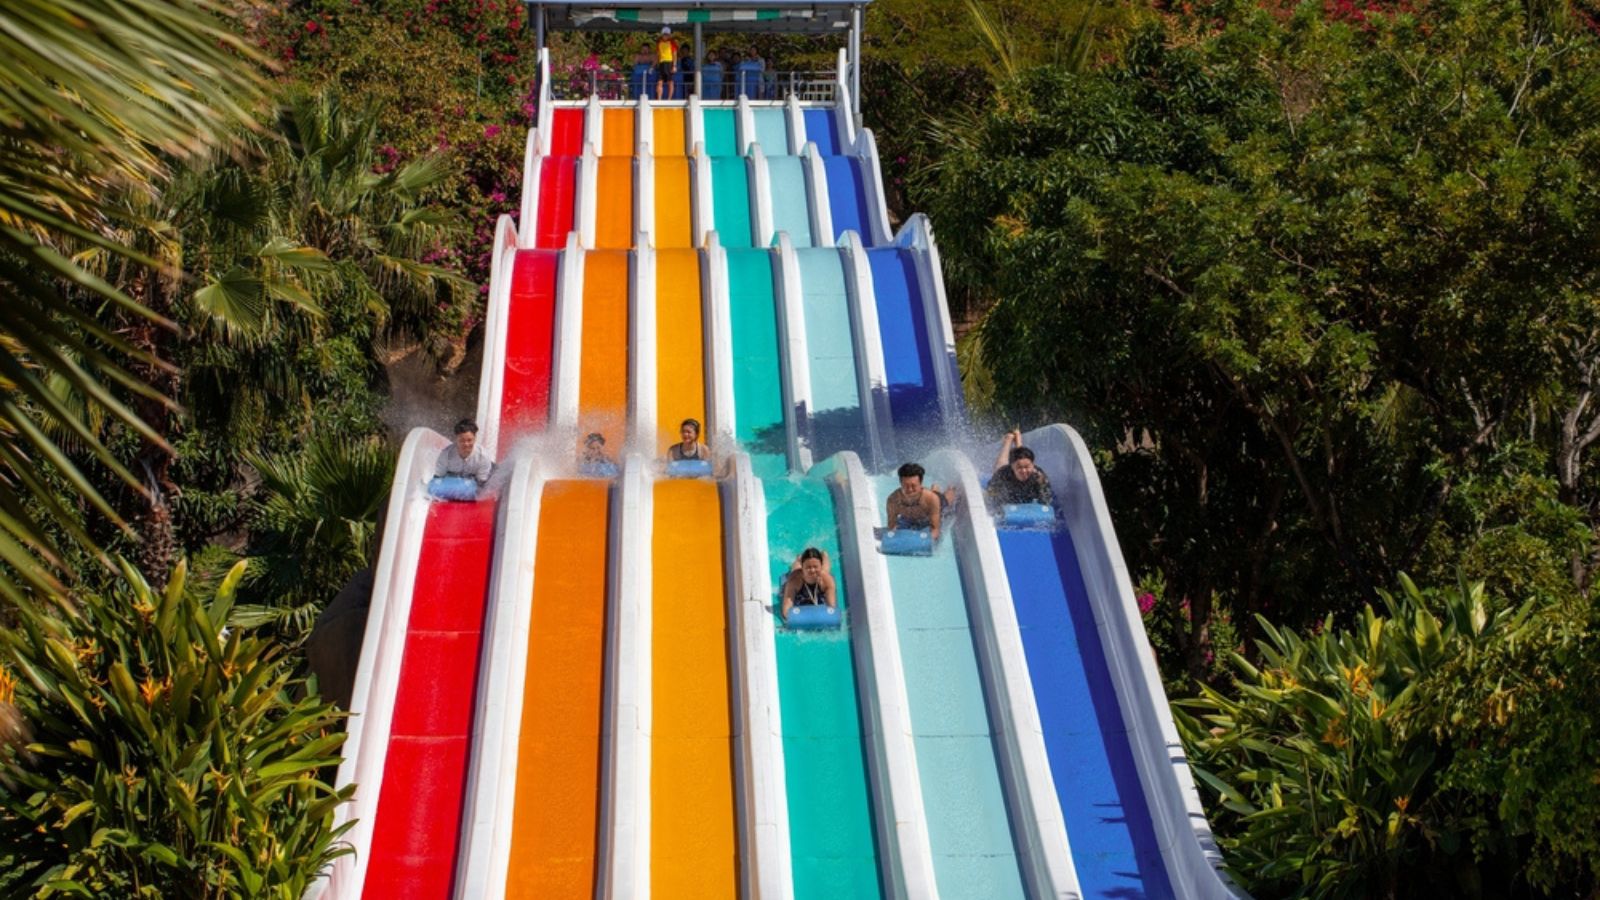 Side by side water slides.